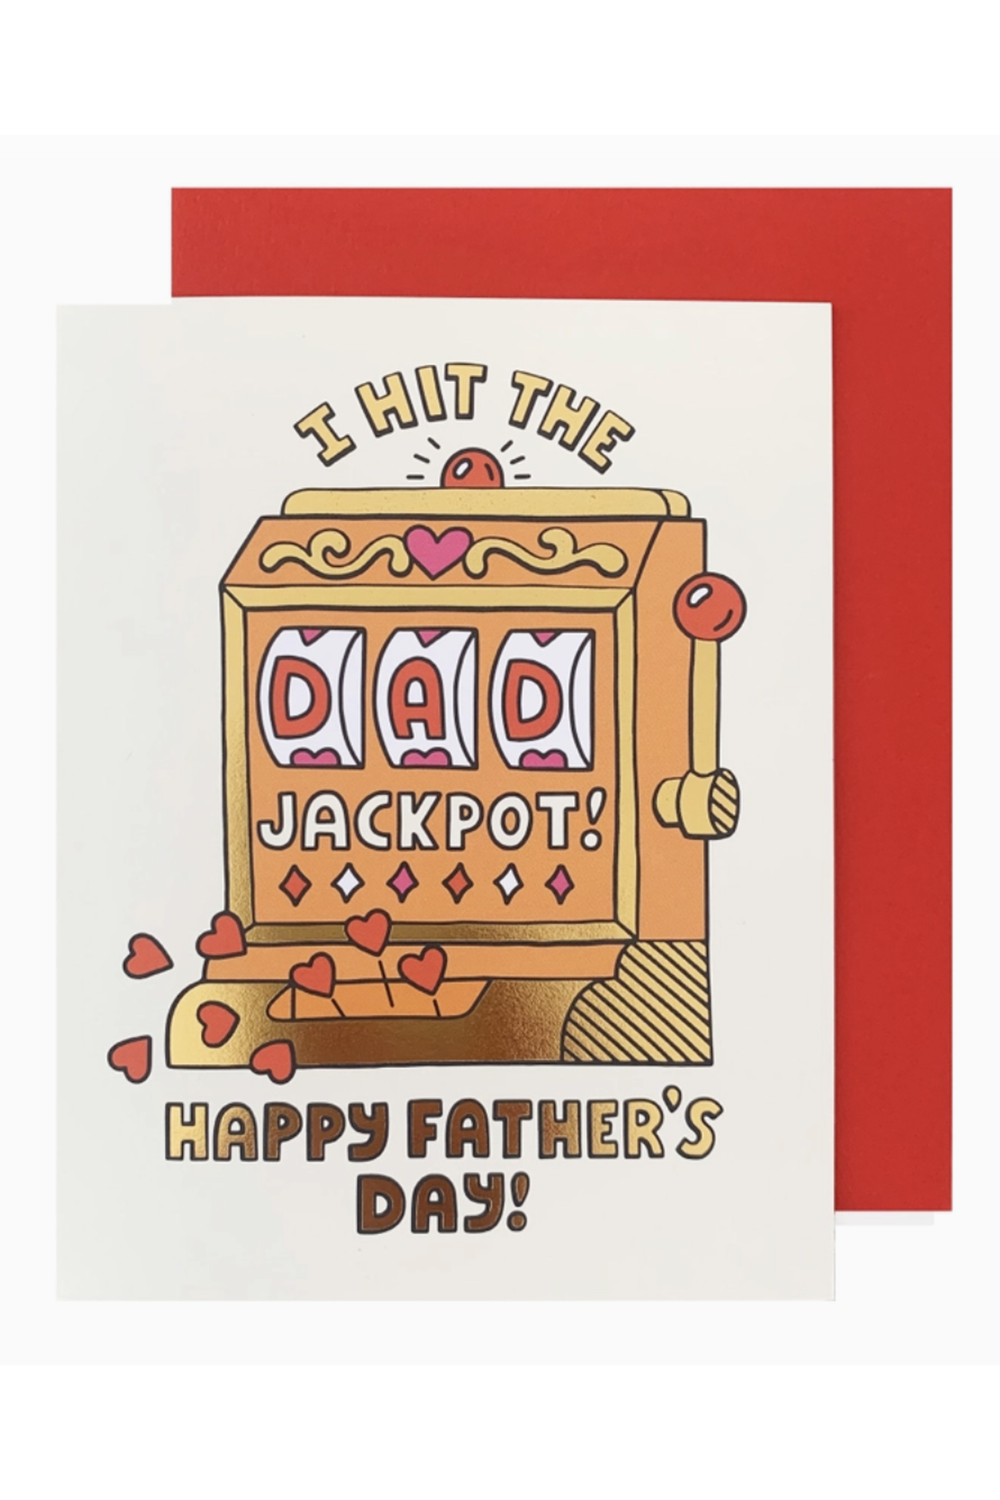 Social Father's Day Greeting Card - Dad Jackpot